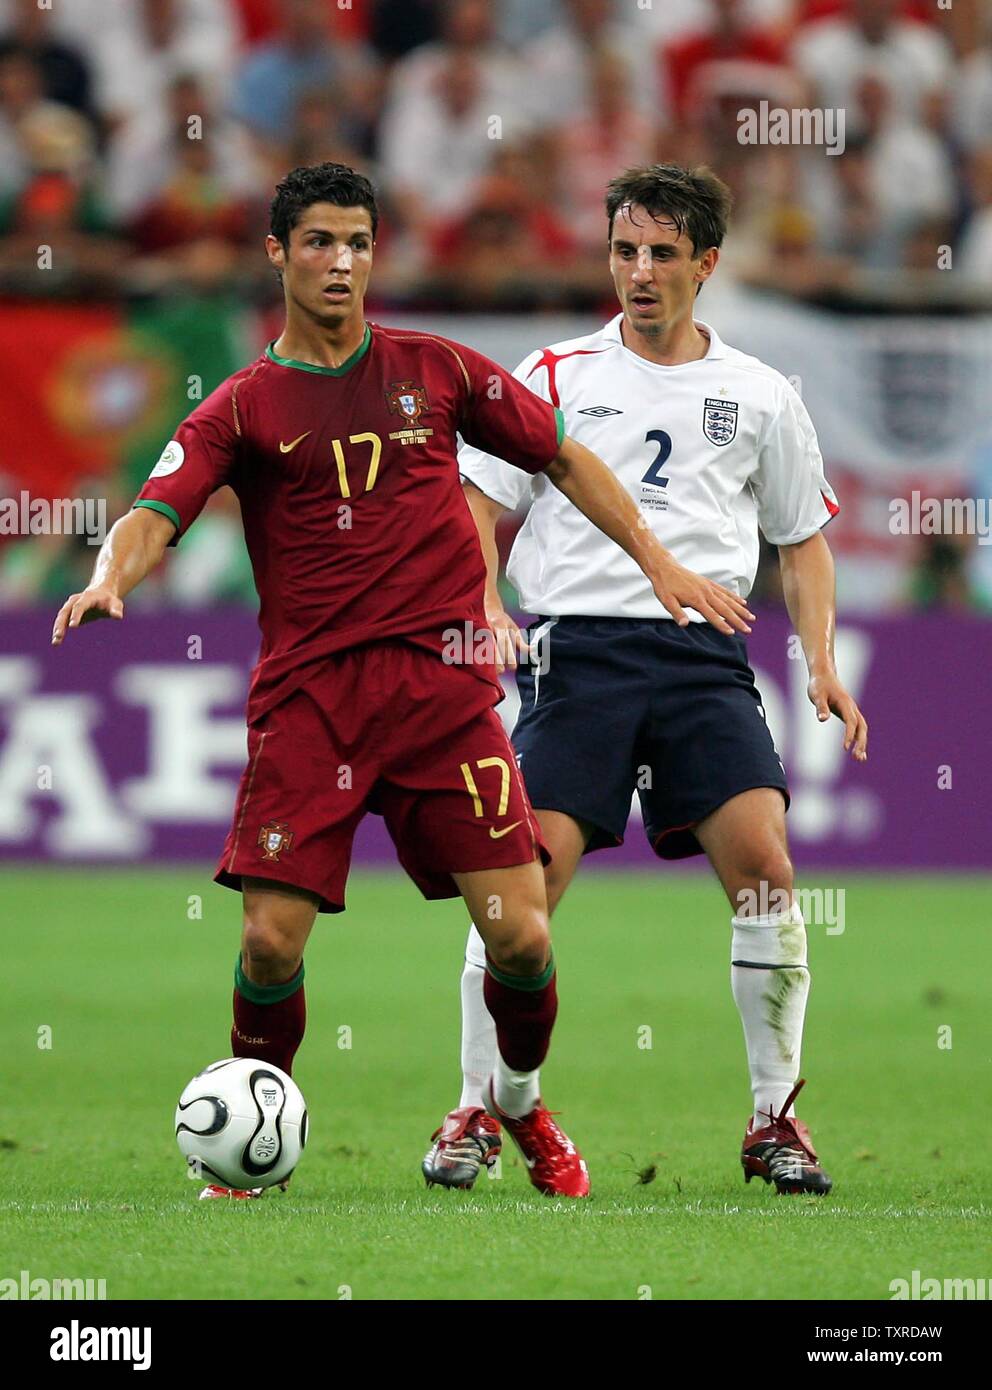 England's Gary Neville and Portugal's Cristiano Ronaldo during the quarter final match of the FIFA World Cup Germany 2006 at the Arena AufSchalke in Gelsenkirchen on July 1, 2006.  England defeated Portugal  4-2.    (UPI  Photo/Chris Brunskill) Stock Photo